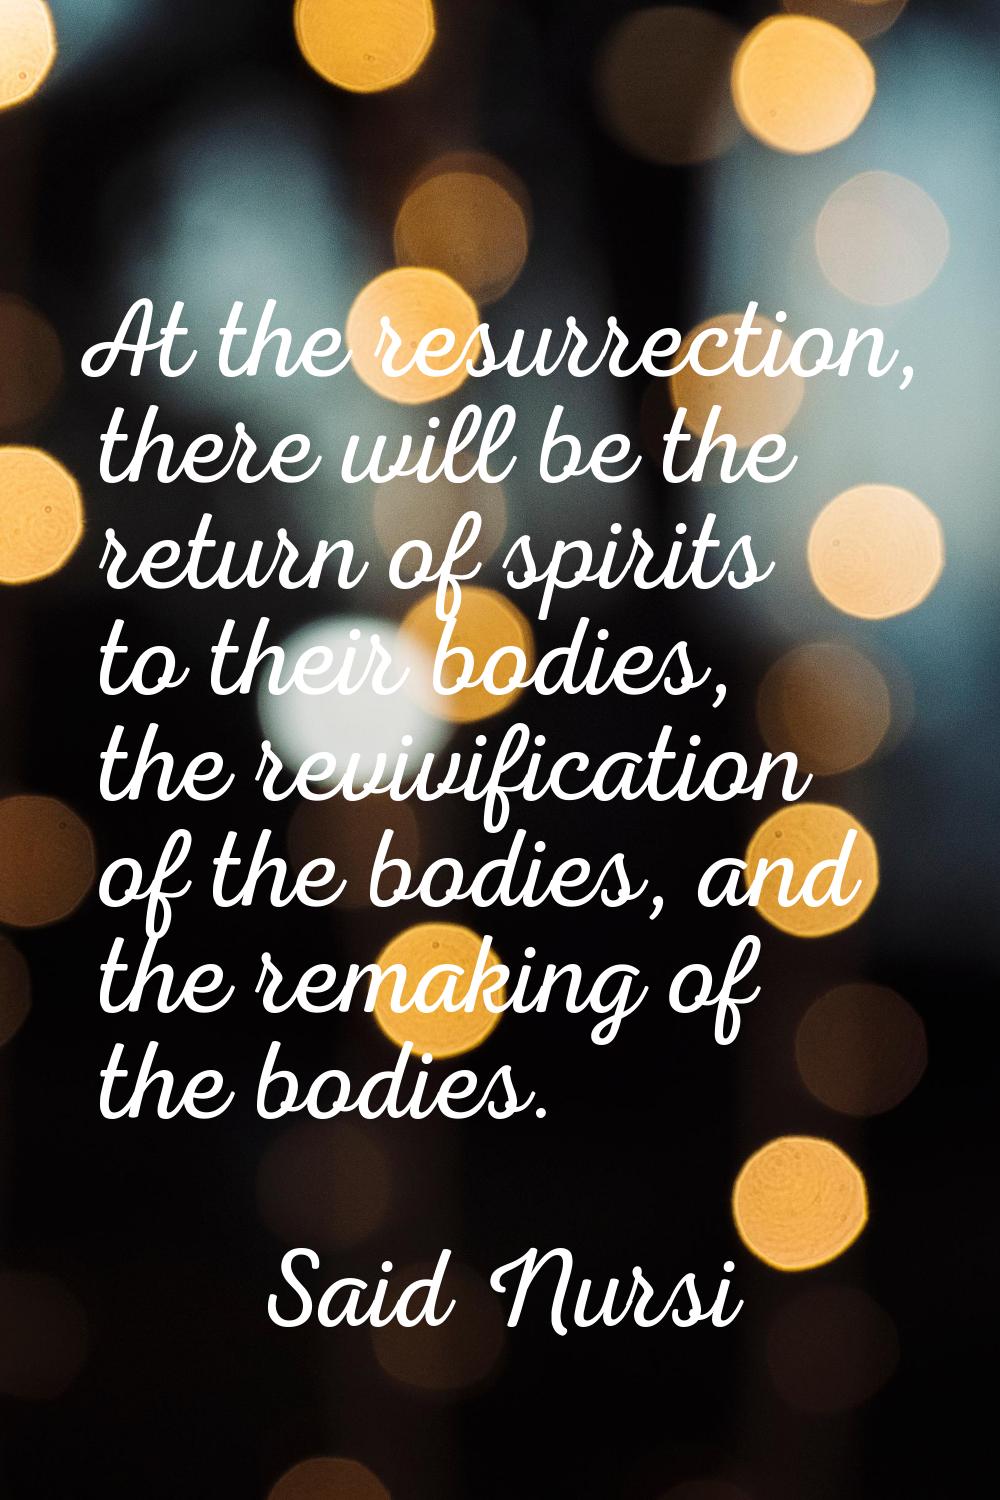 At the resurrection, there will be the return of spirits to their bodies, the revivification of the